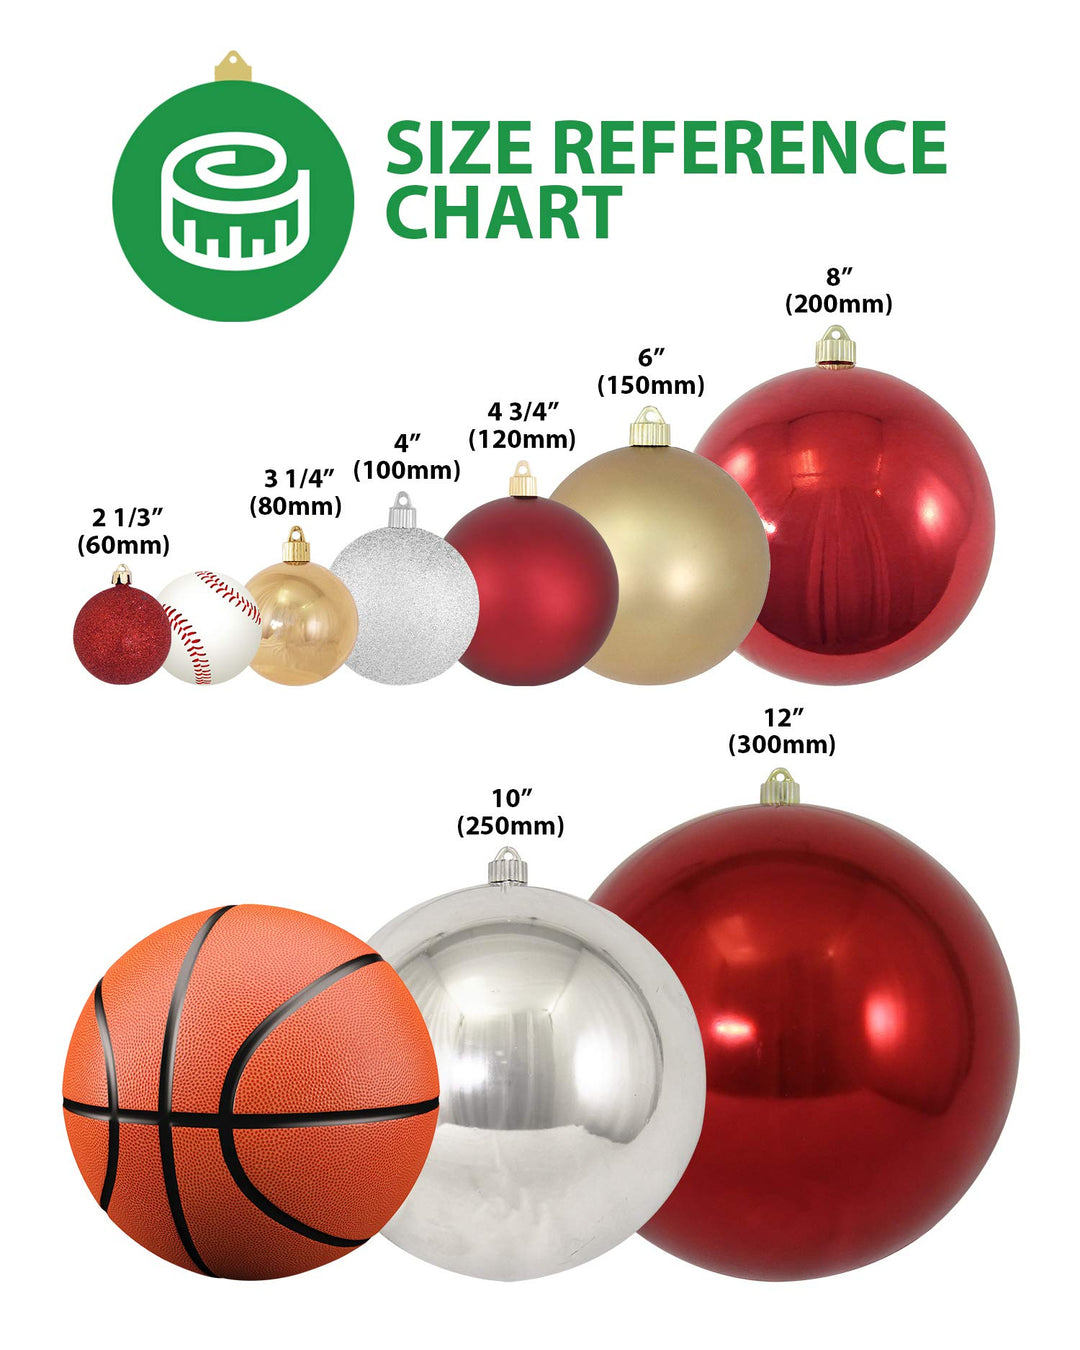 2 1/3" (60mm) Shatterproof Christmas Ball Ornaments, Green Multi, Case, 16 Count x 12 Tubs, 192 Pieces